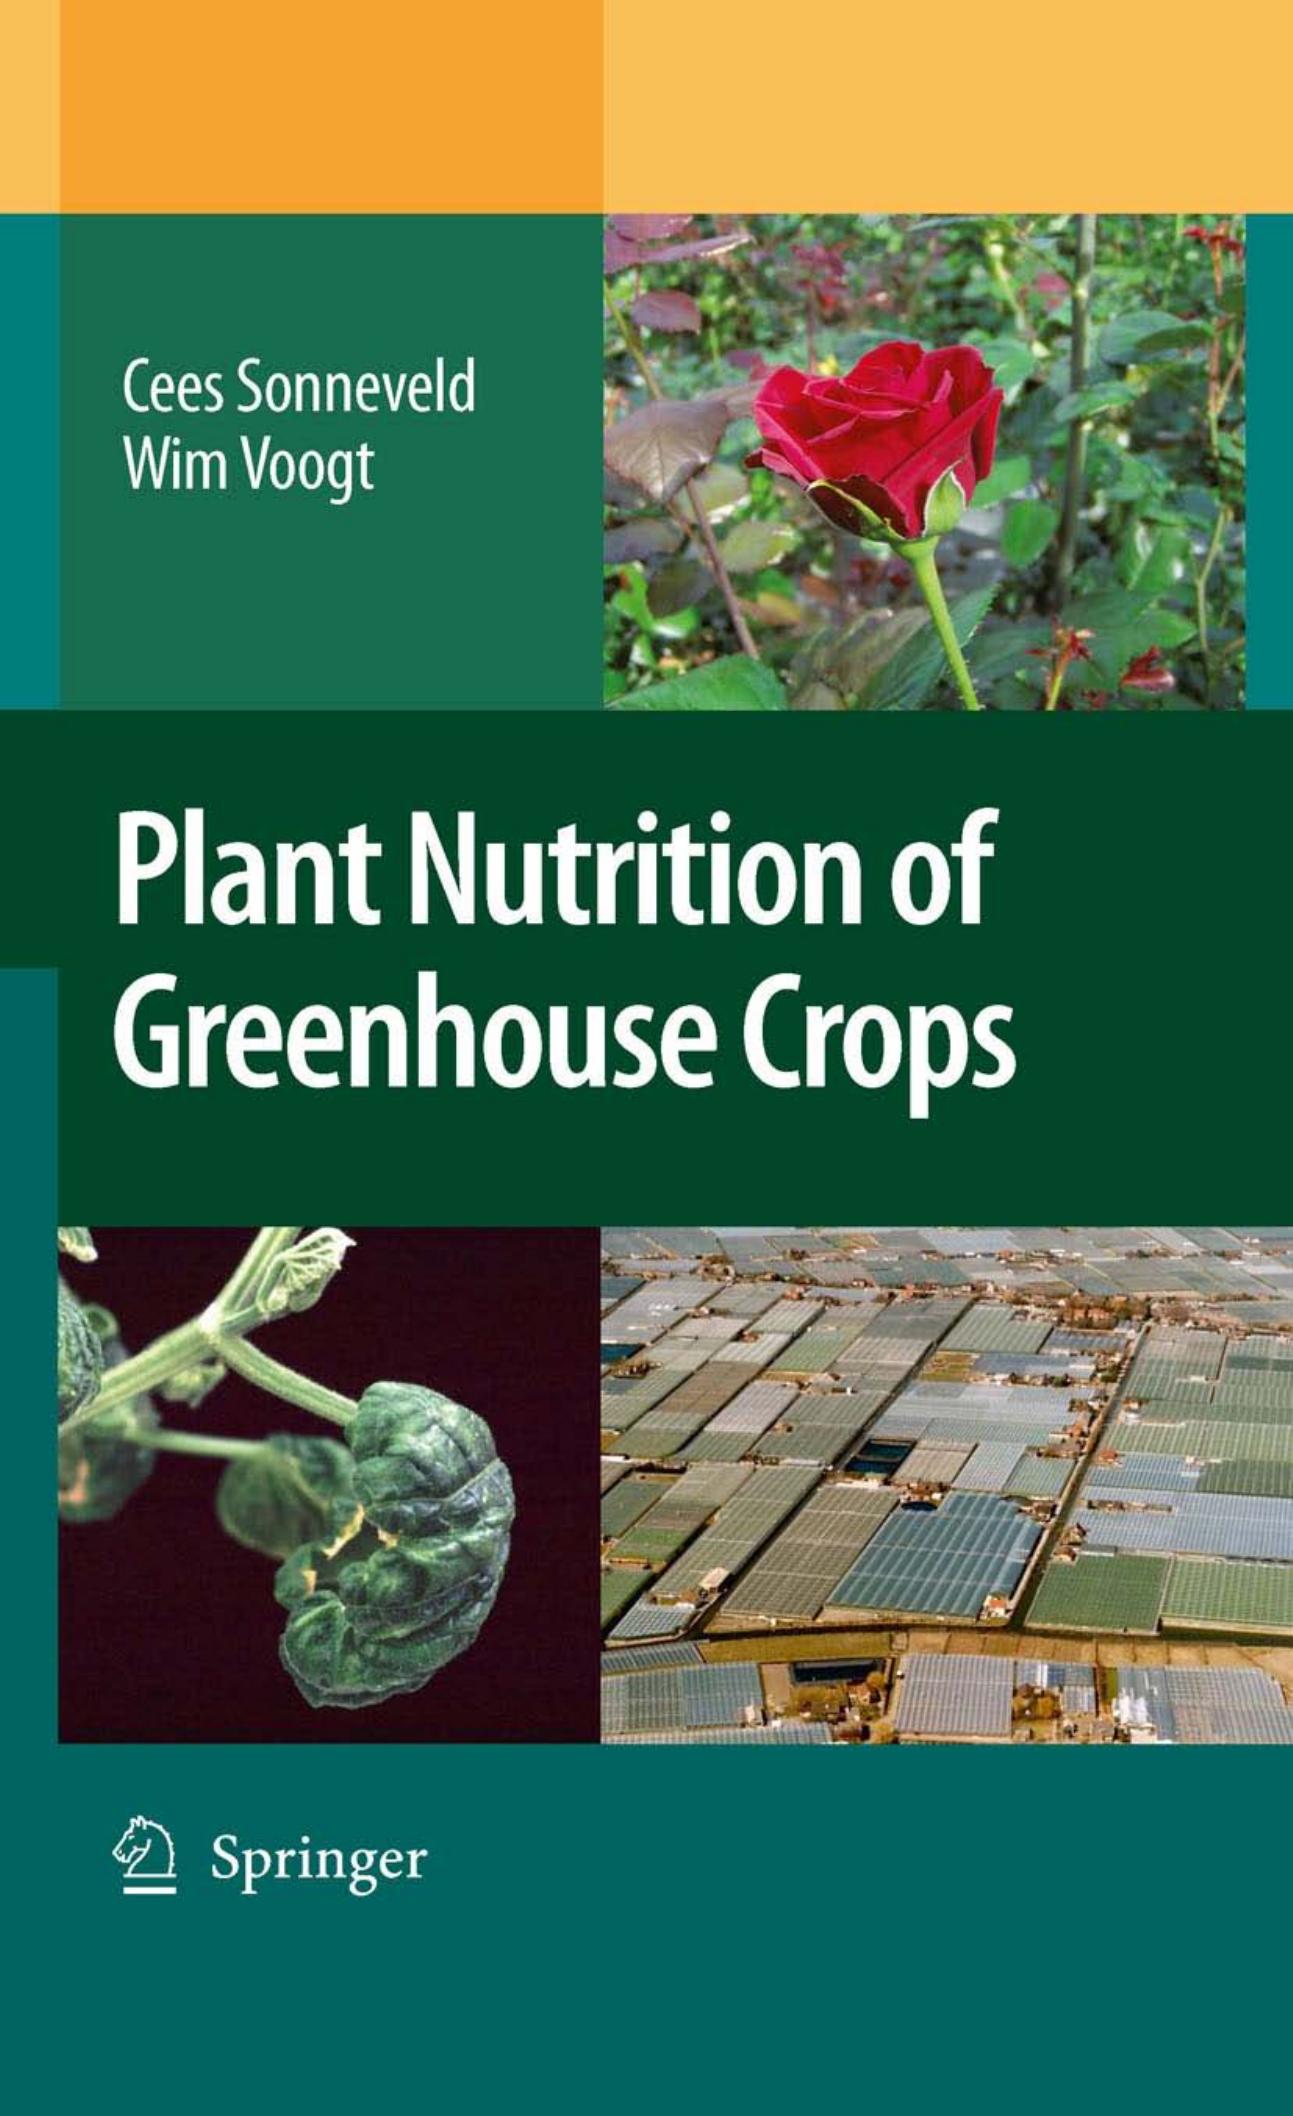 Plant Nutrition of Greenhouse Crops ( PDFDrive ), 2009